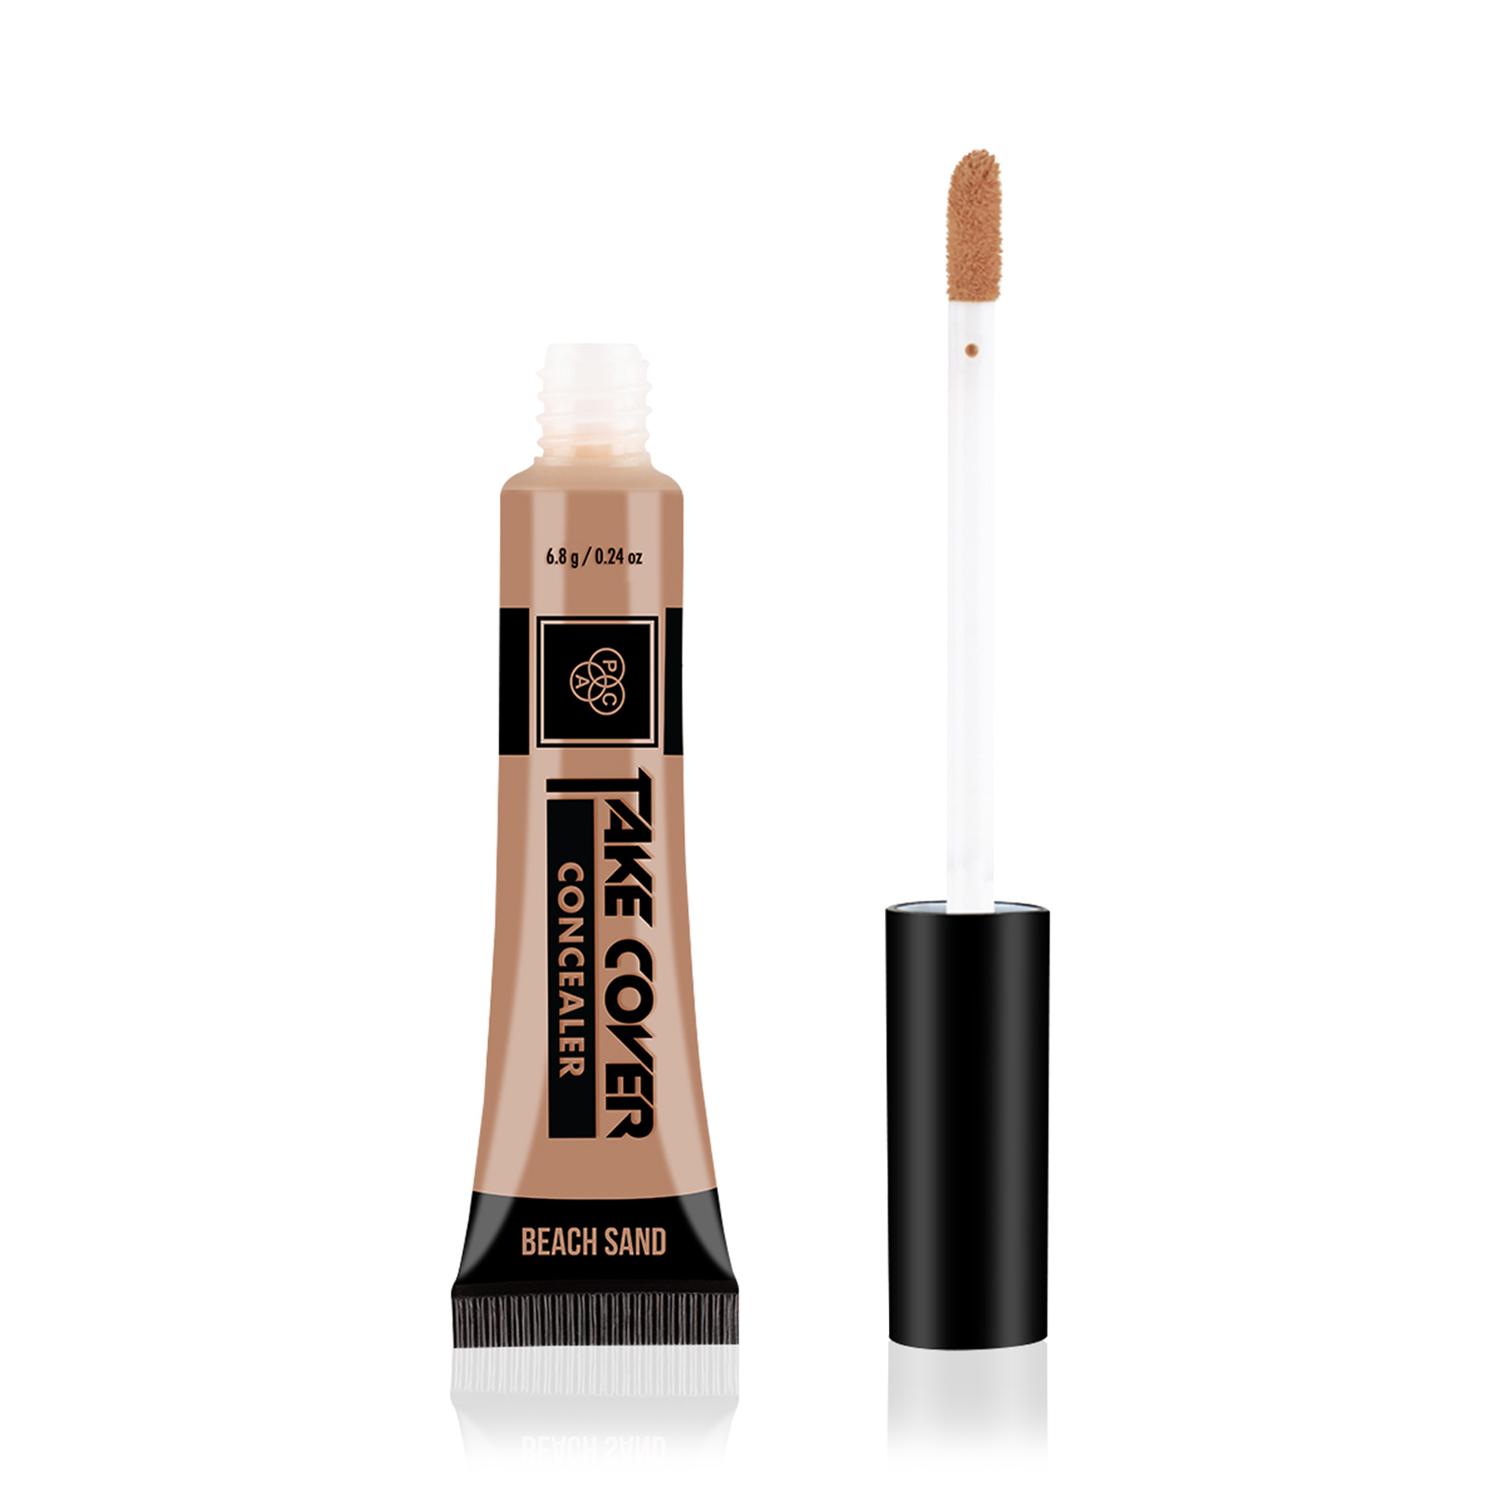 PAC | PAC Take Cover Concealer - 01 Beach Sand (6.8g)